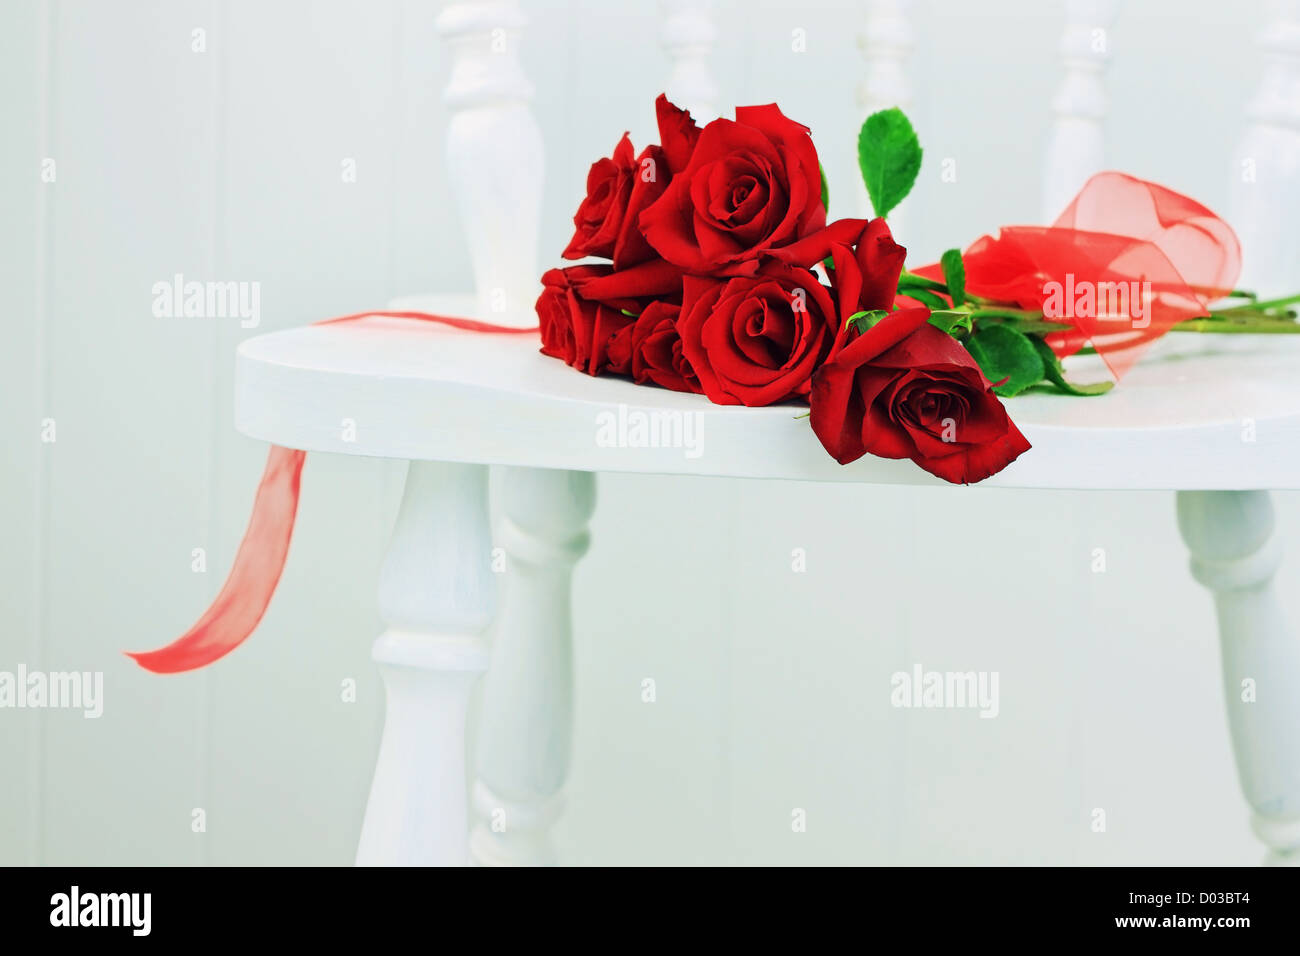 Beautiful long stem roses with ribbin on a white chair against a white wall. Stock Photo